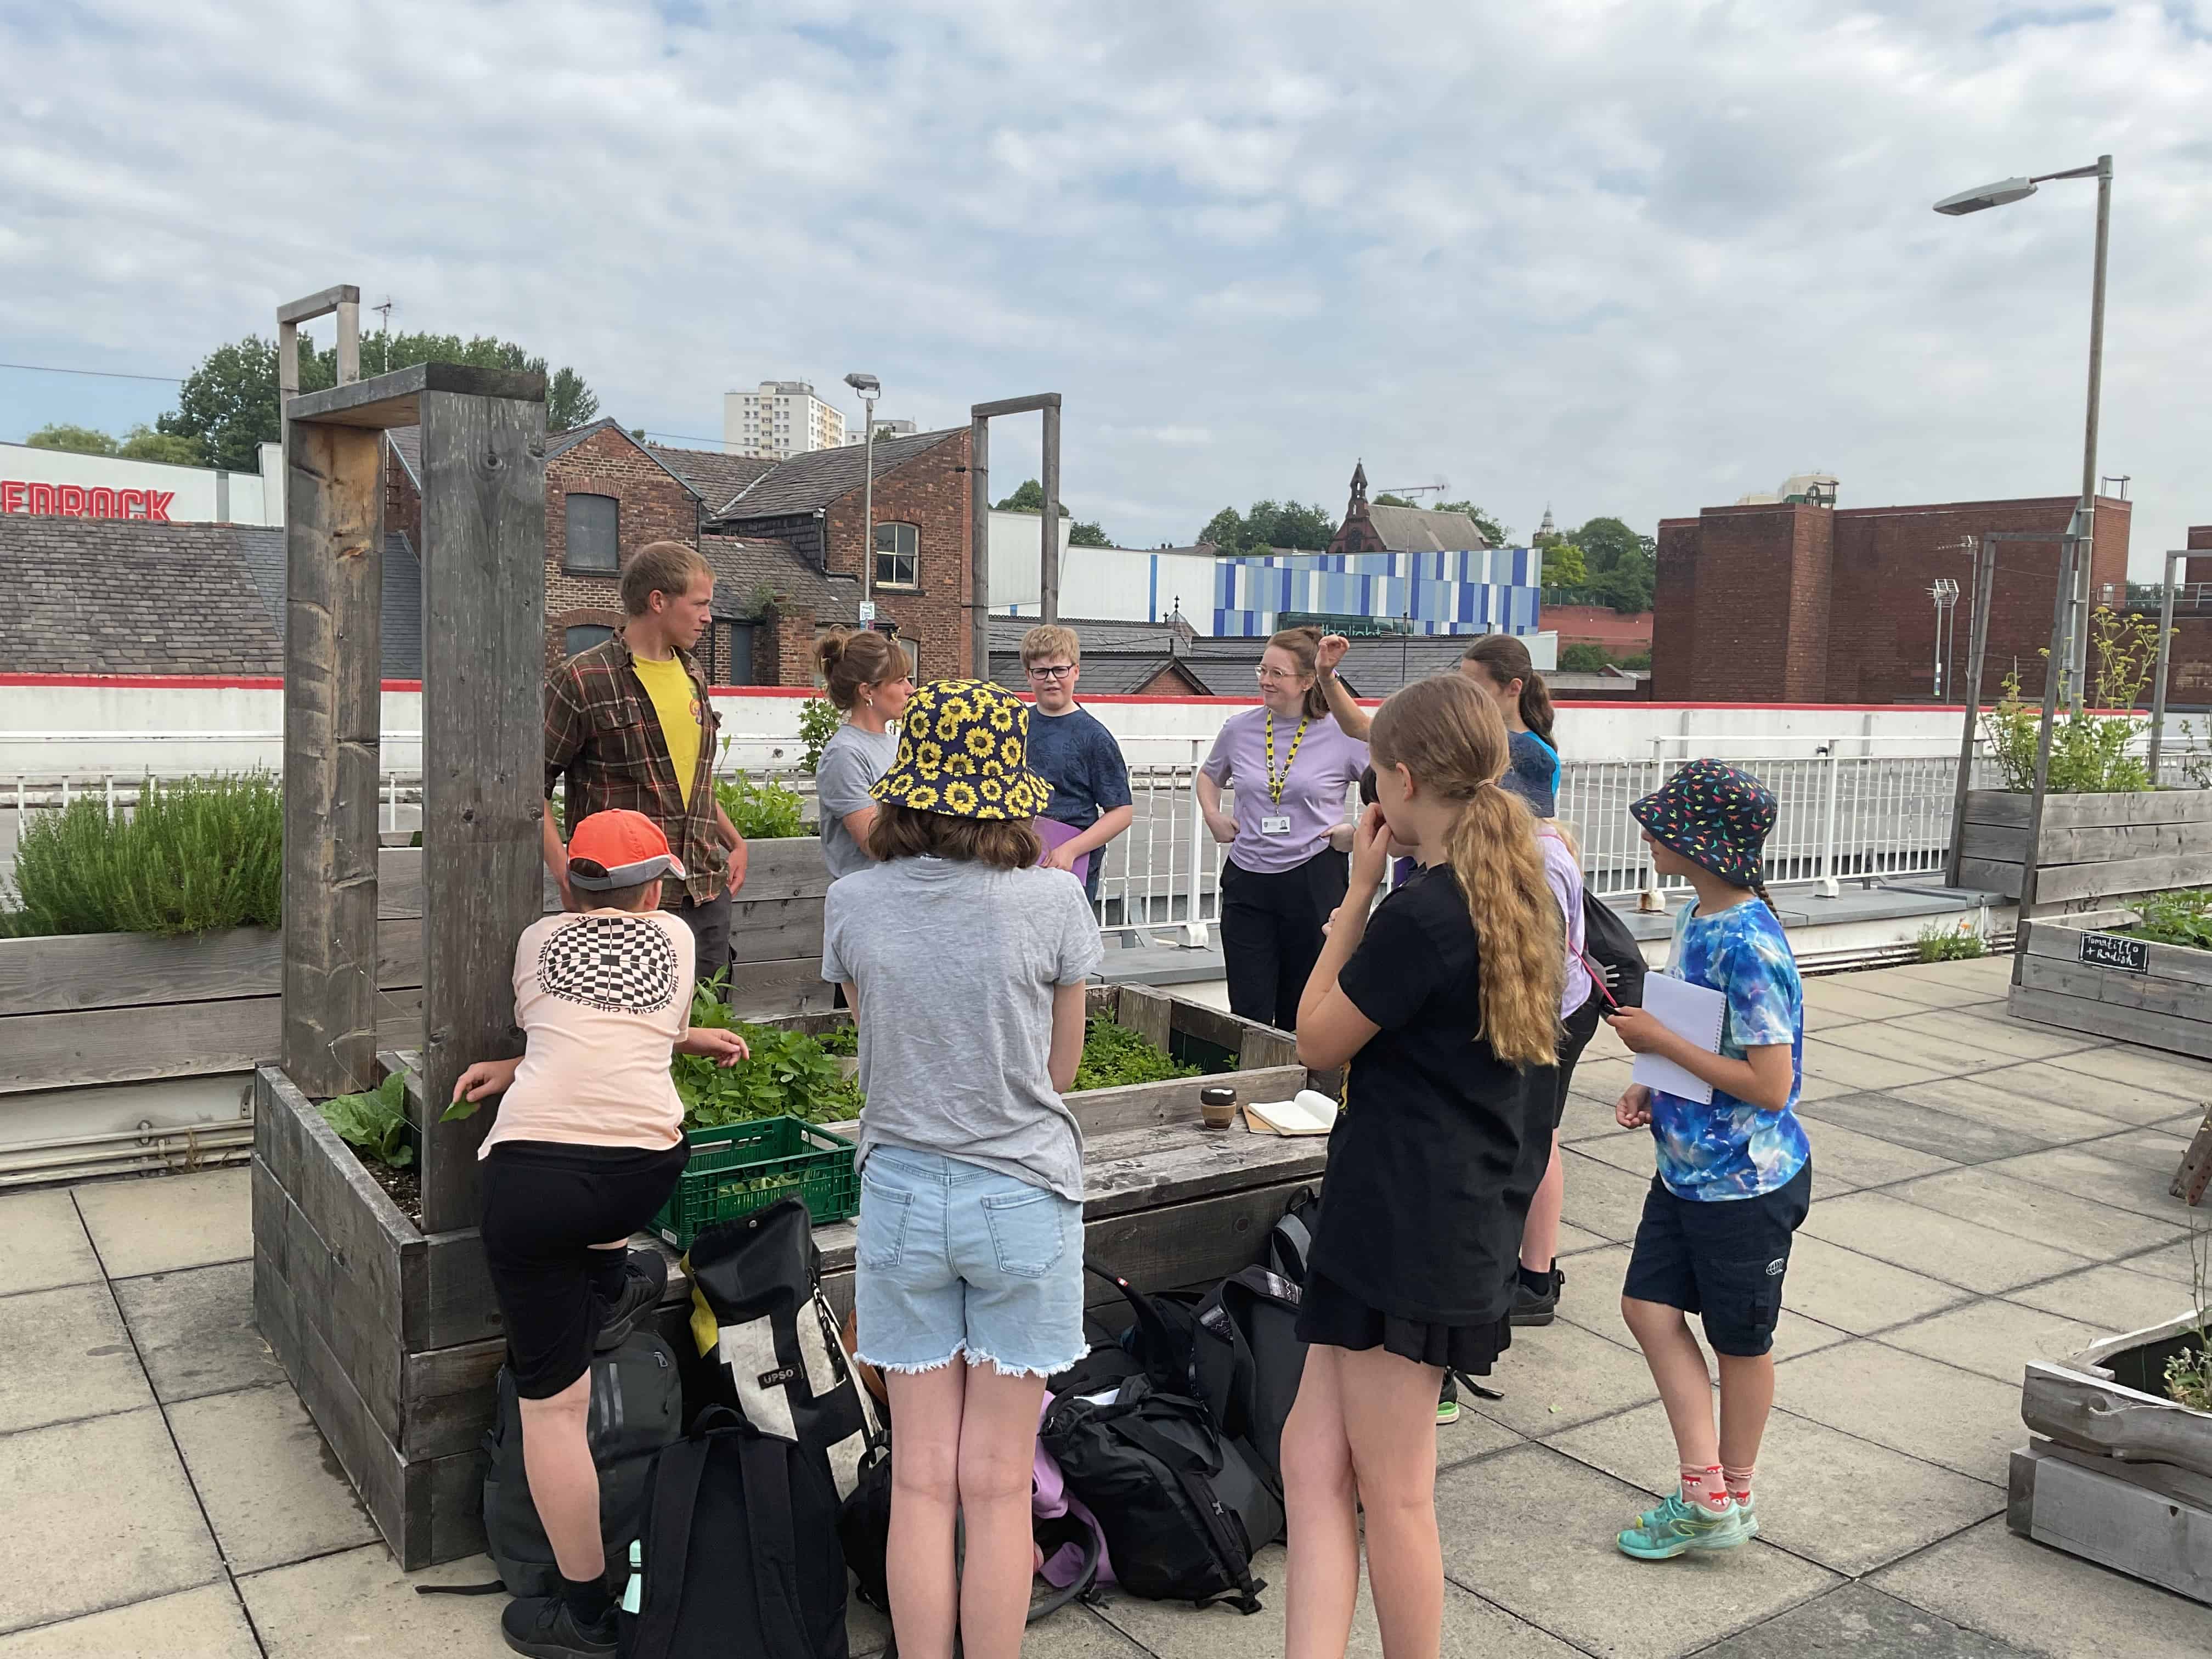 Hazel Grove High School Eco Council are gathered around a vegetable patch in The Landing, listening to a member of staff.